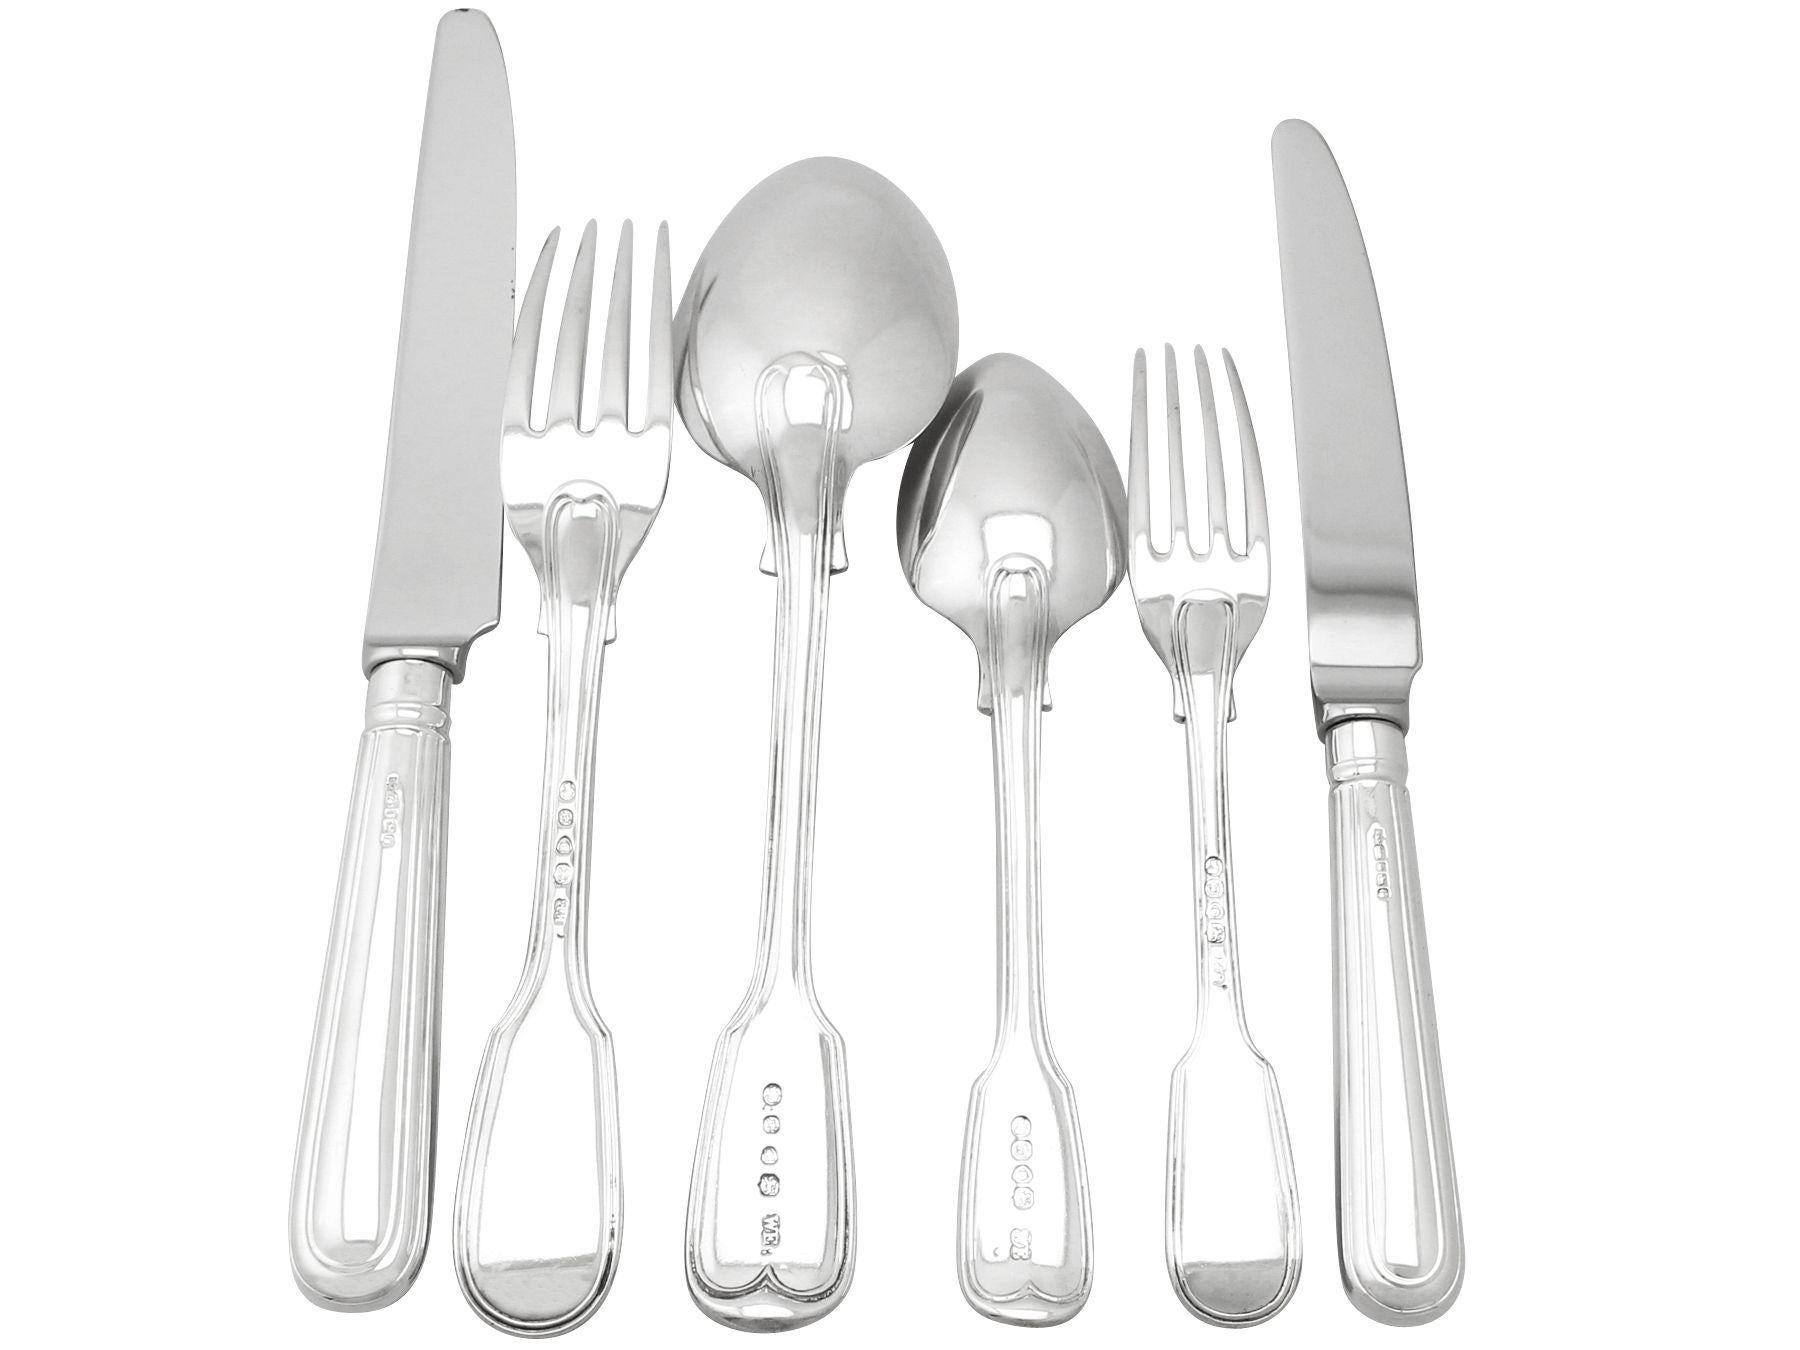 An exceptional, fine and impressive antique Victorian English sterling silver straight fiddle and thread pattern flatware service for eight persons; an addition to our canteen of cutlery collection.

The pieces of this exceptional antique